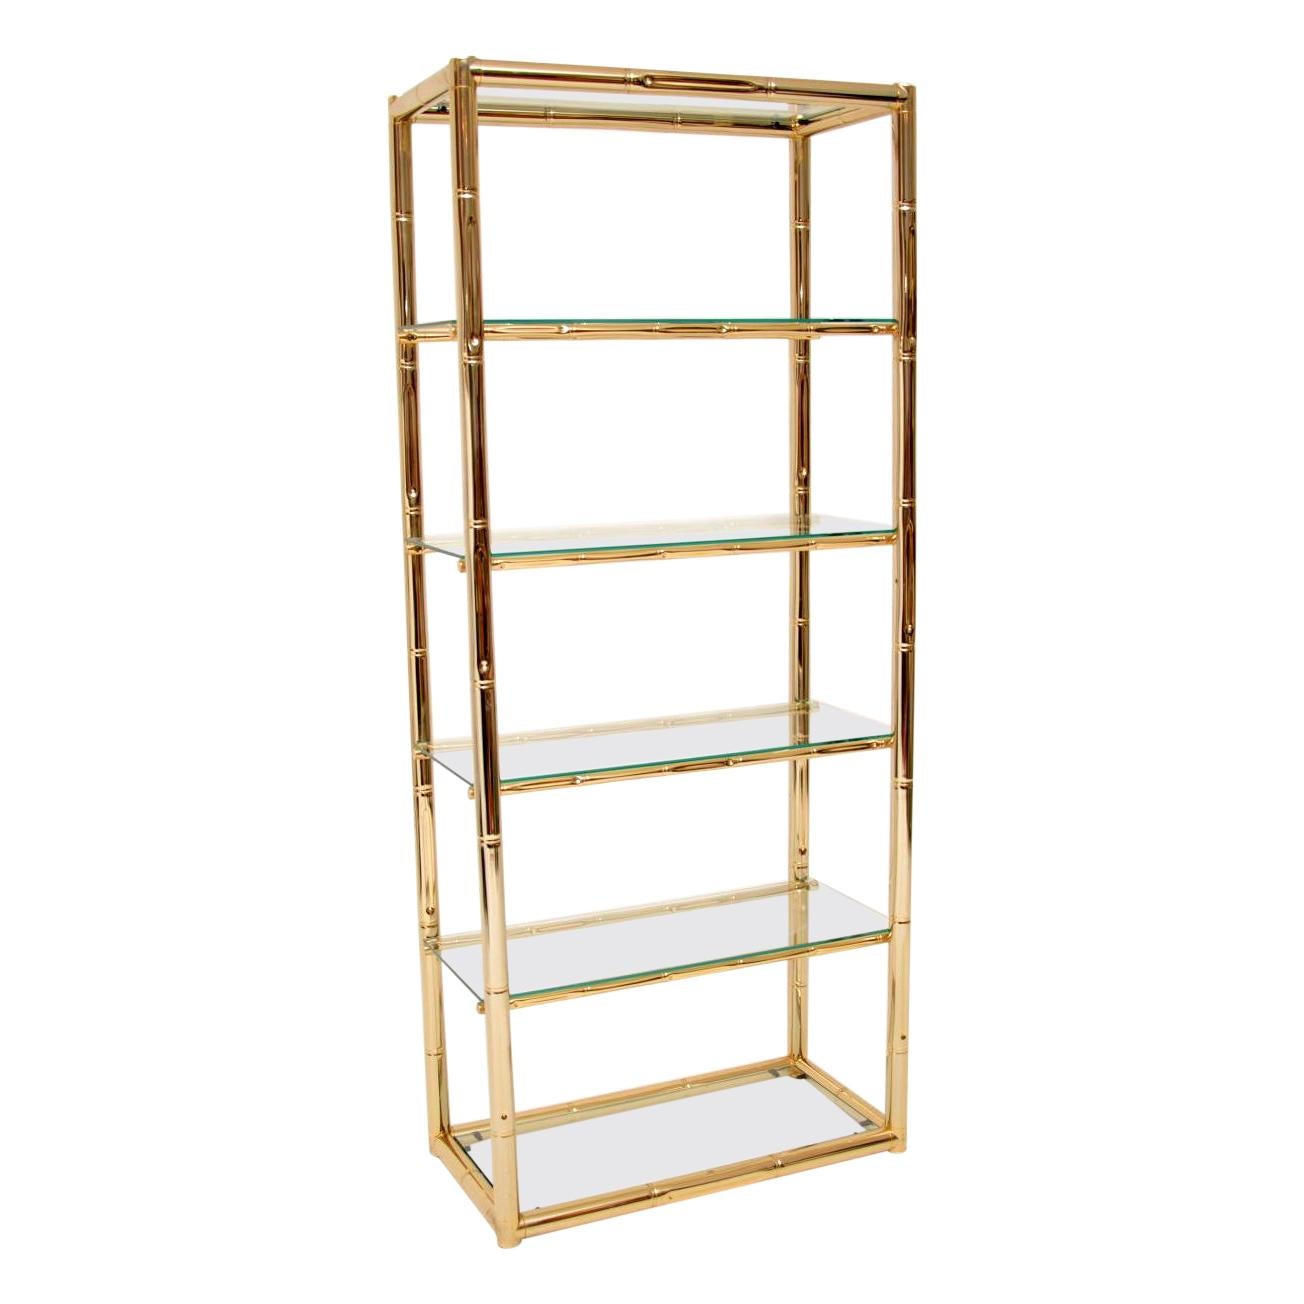 1970s Vintage Italian Brass and Glass Cabinet / Bookcase